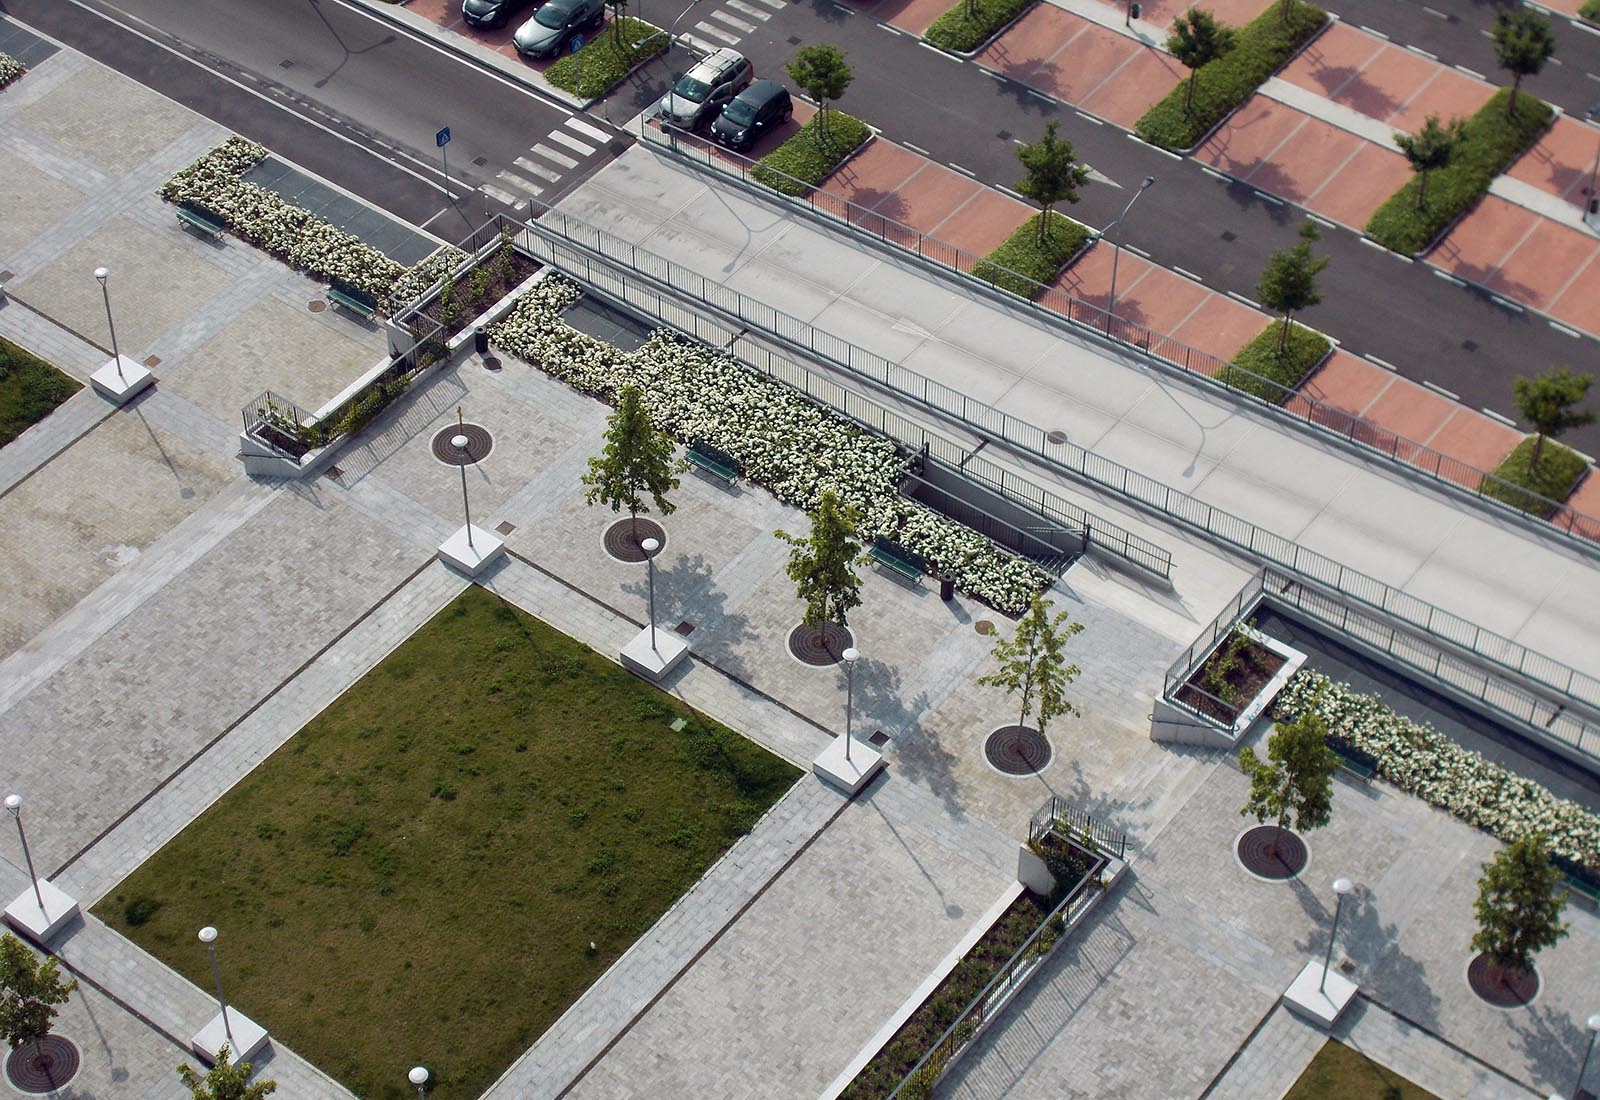 Square and parking lots in Adriano area Milan - The square